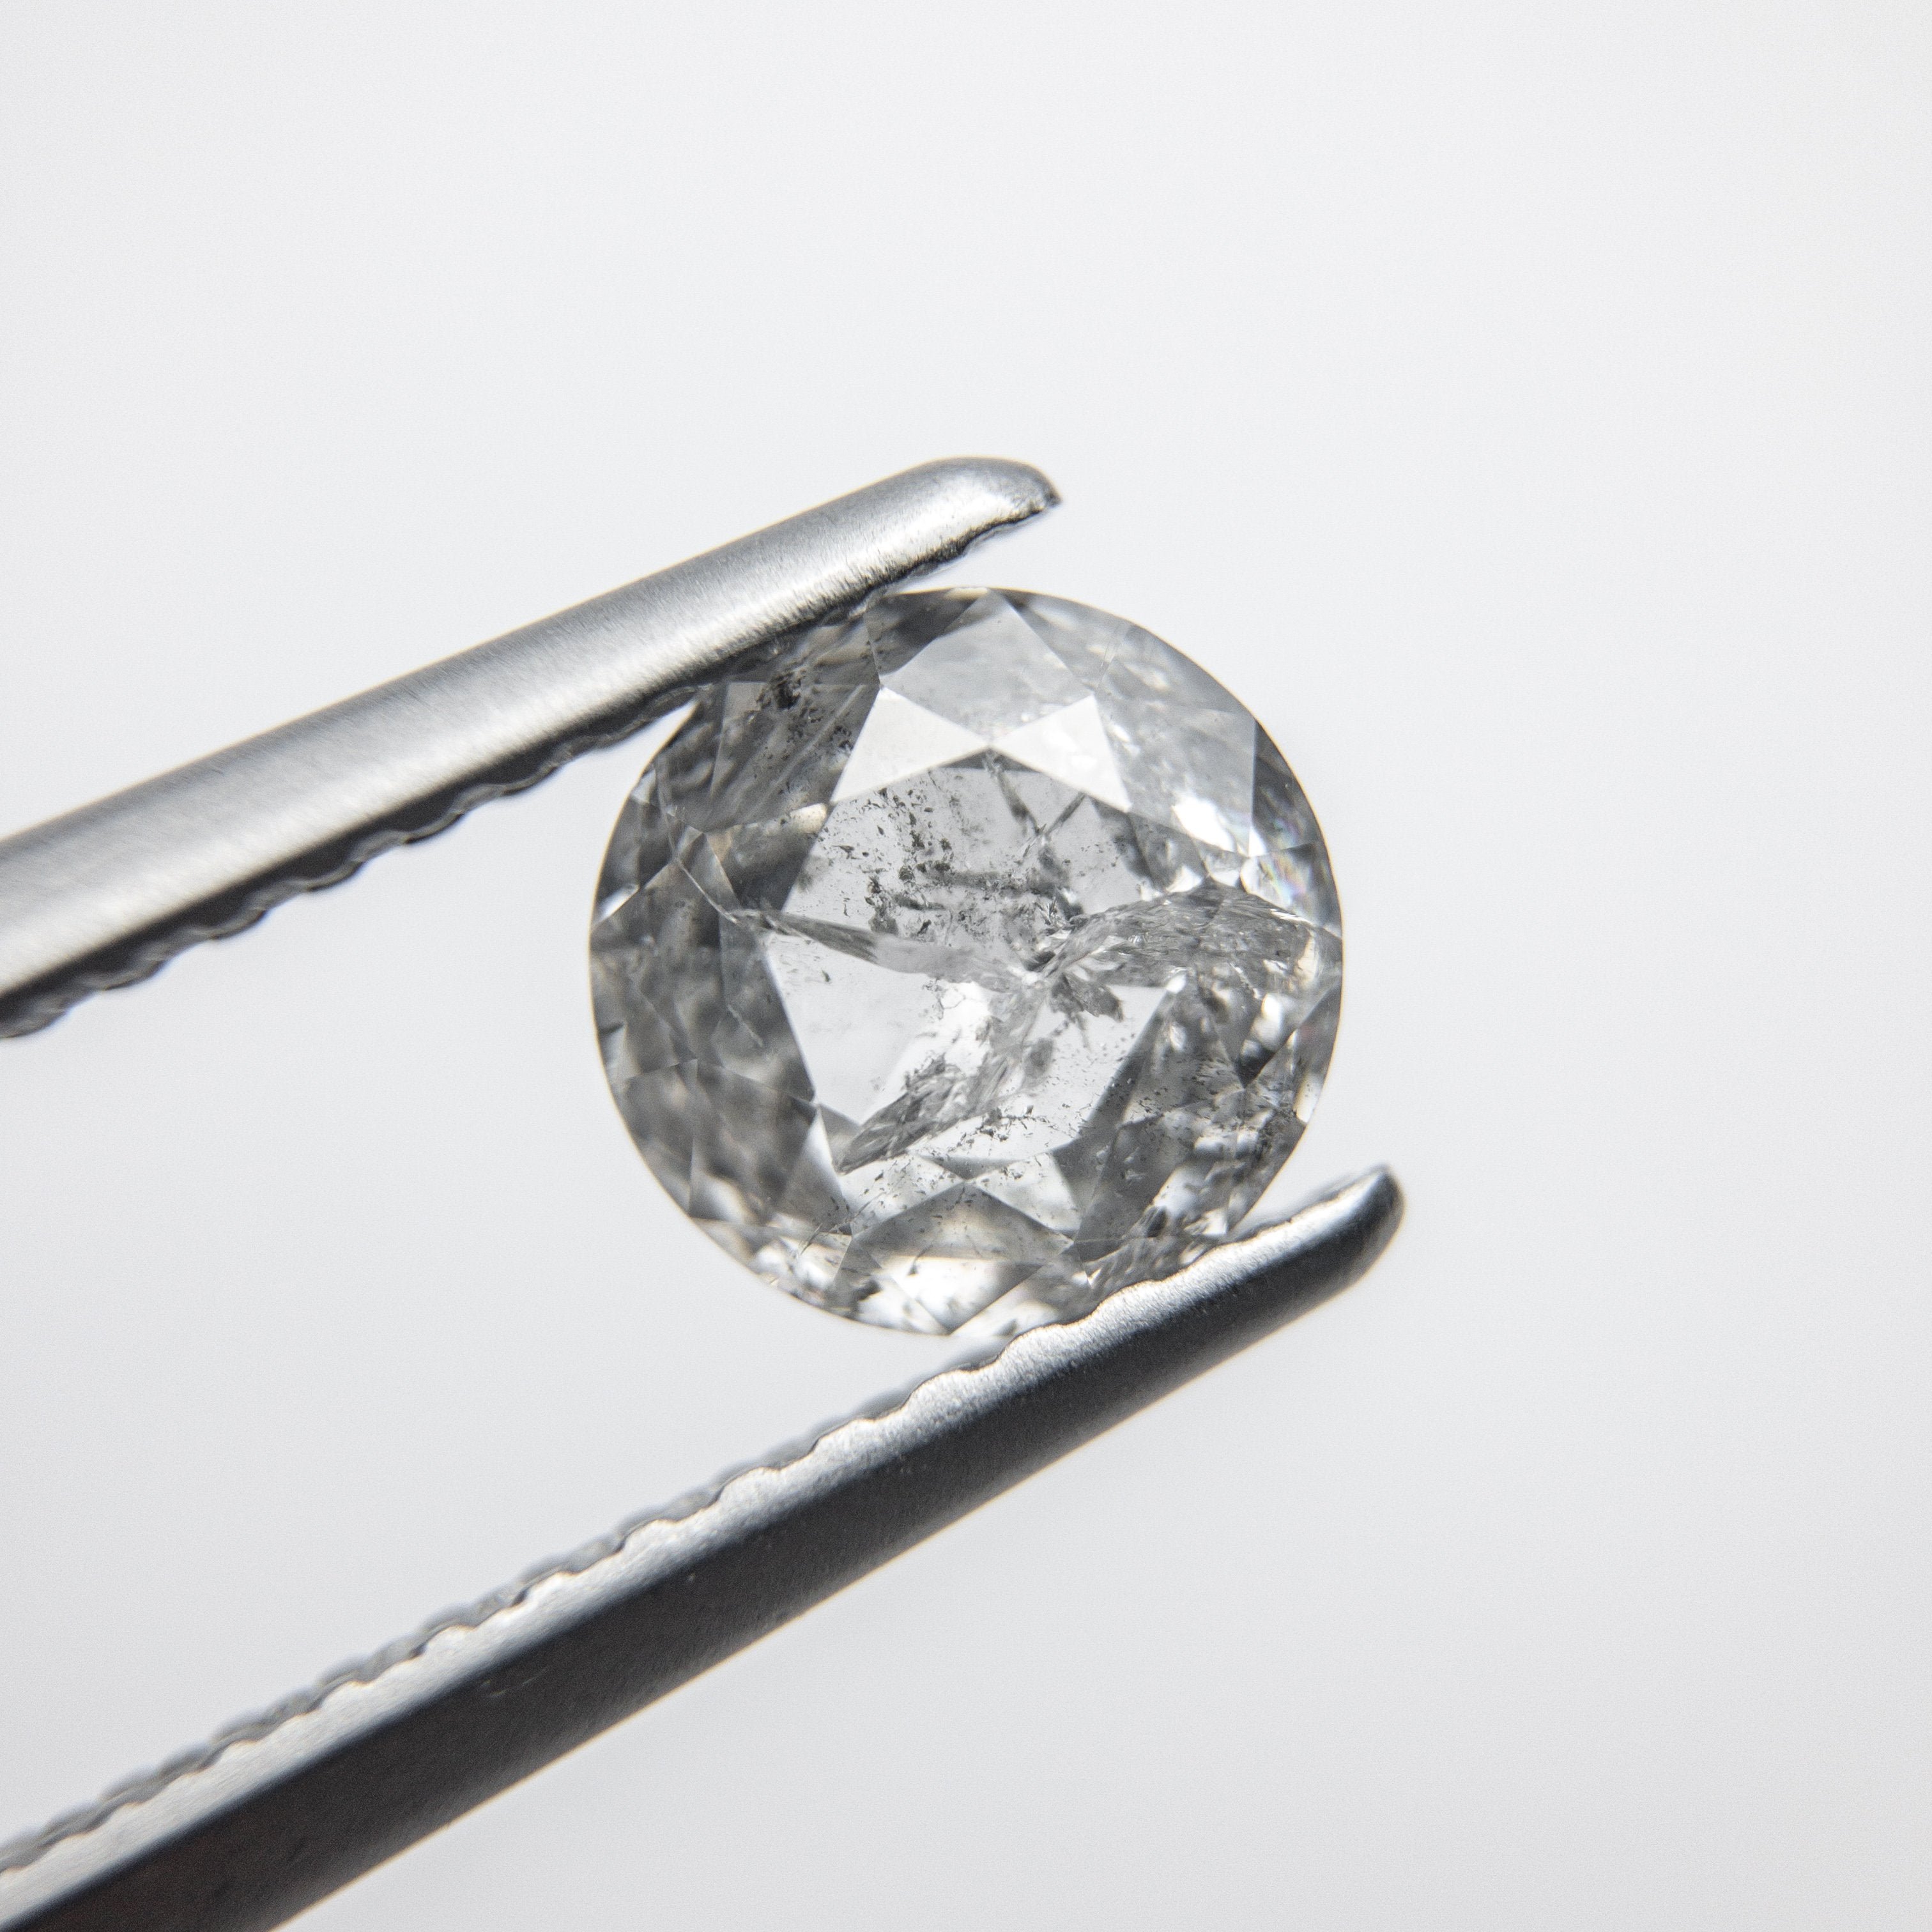 0.98ct 6.29x6.25x3.17mm Round Double Cut 18094-08 HOLD 06.18.20 D792